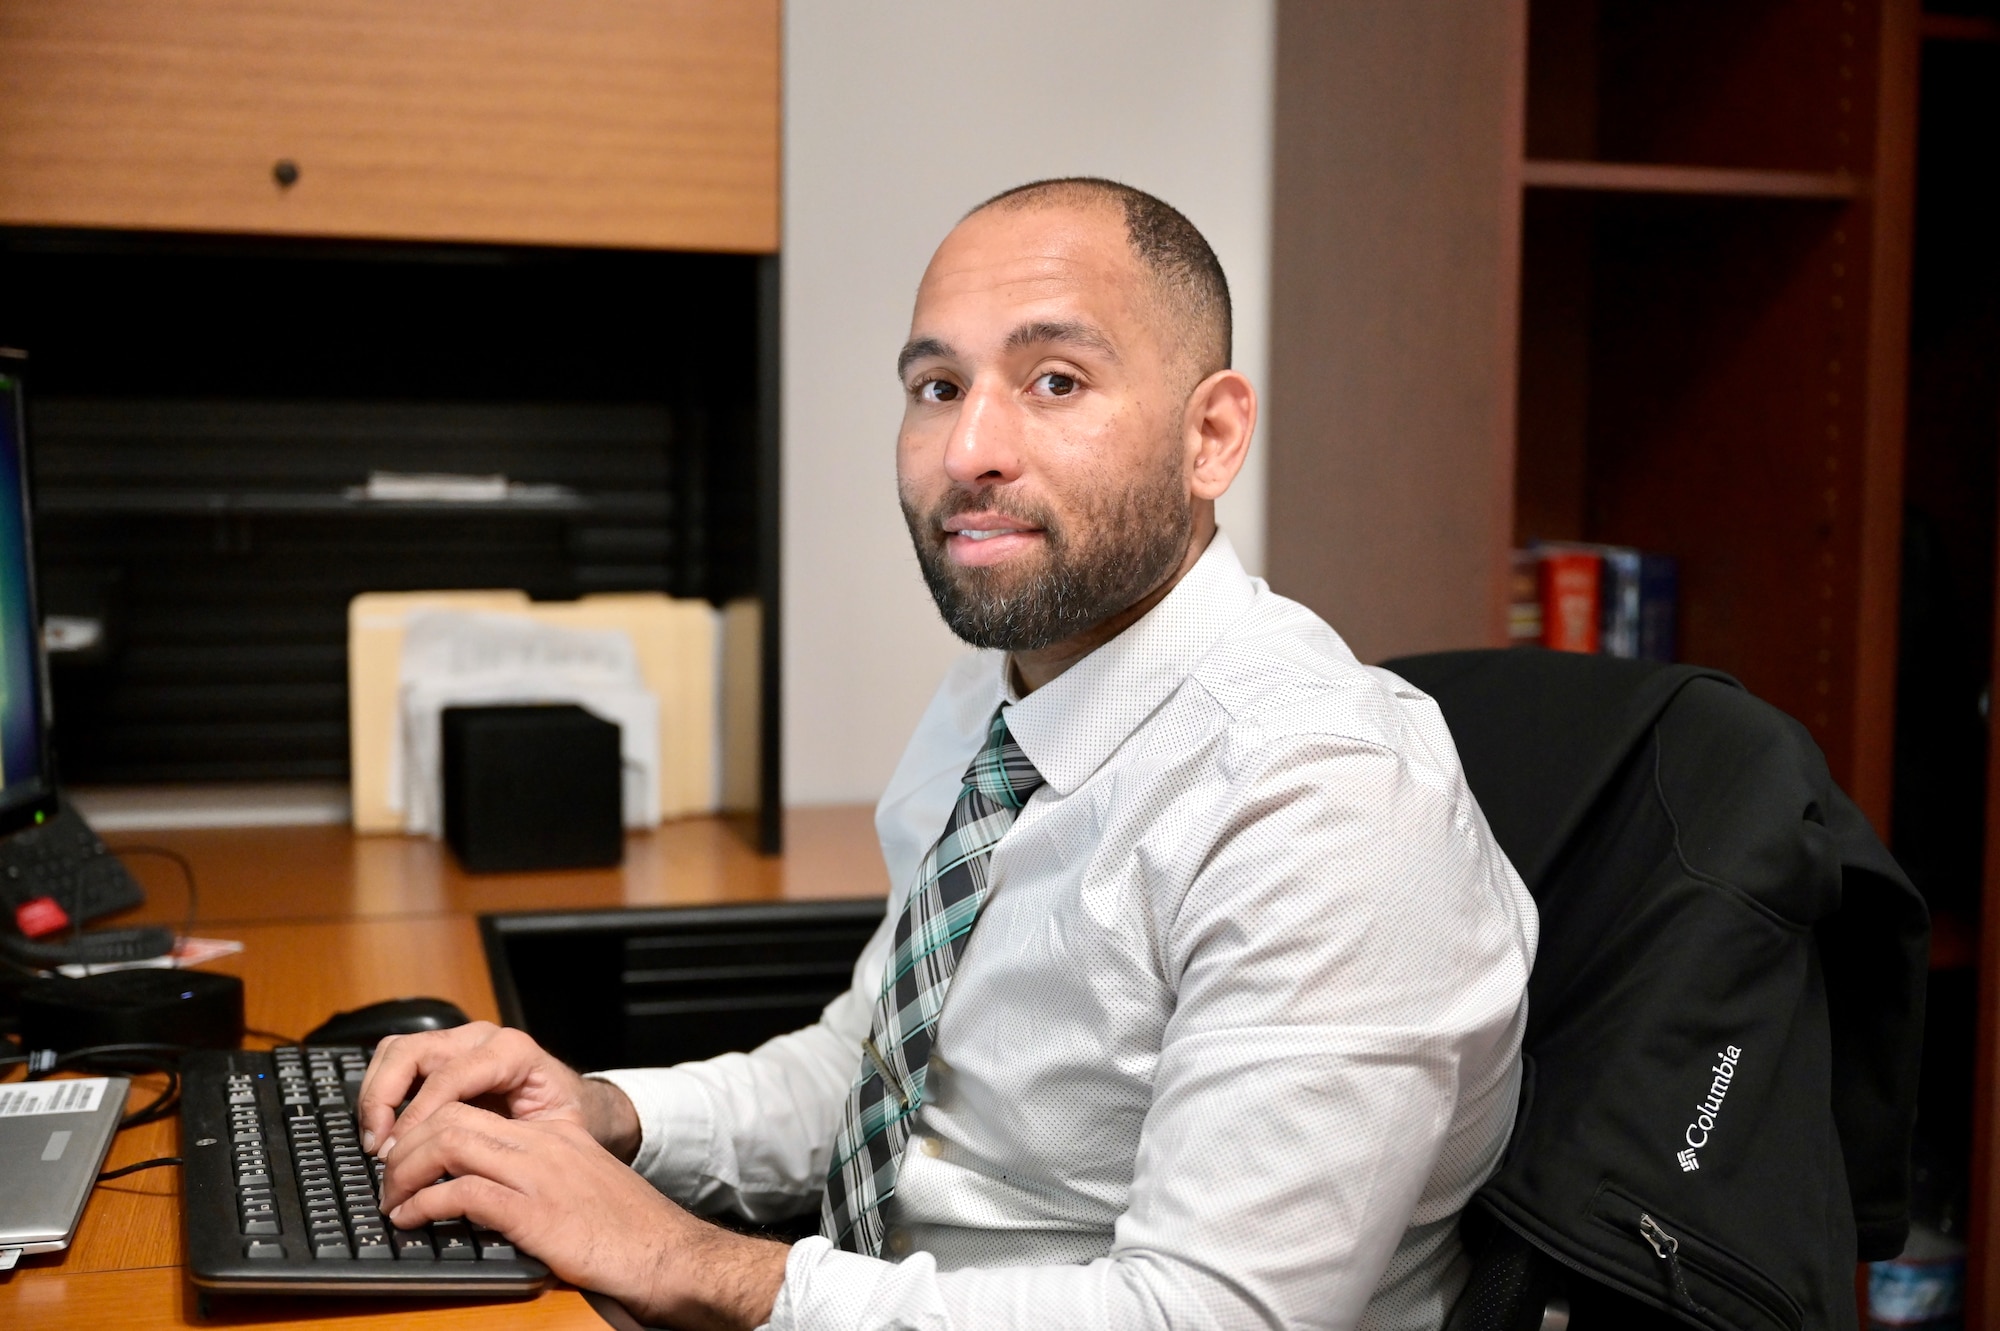 Dr. Paul T. Stearns sits at his desk, working on diversity and inclusion projects.